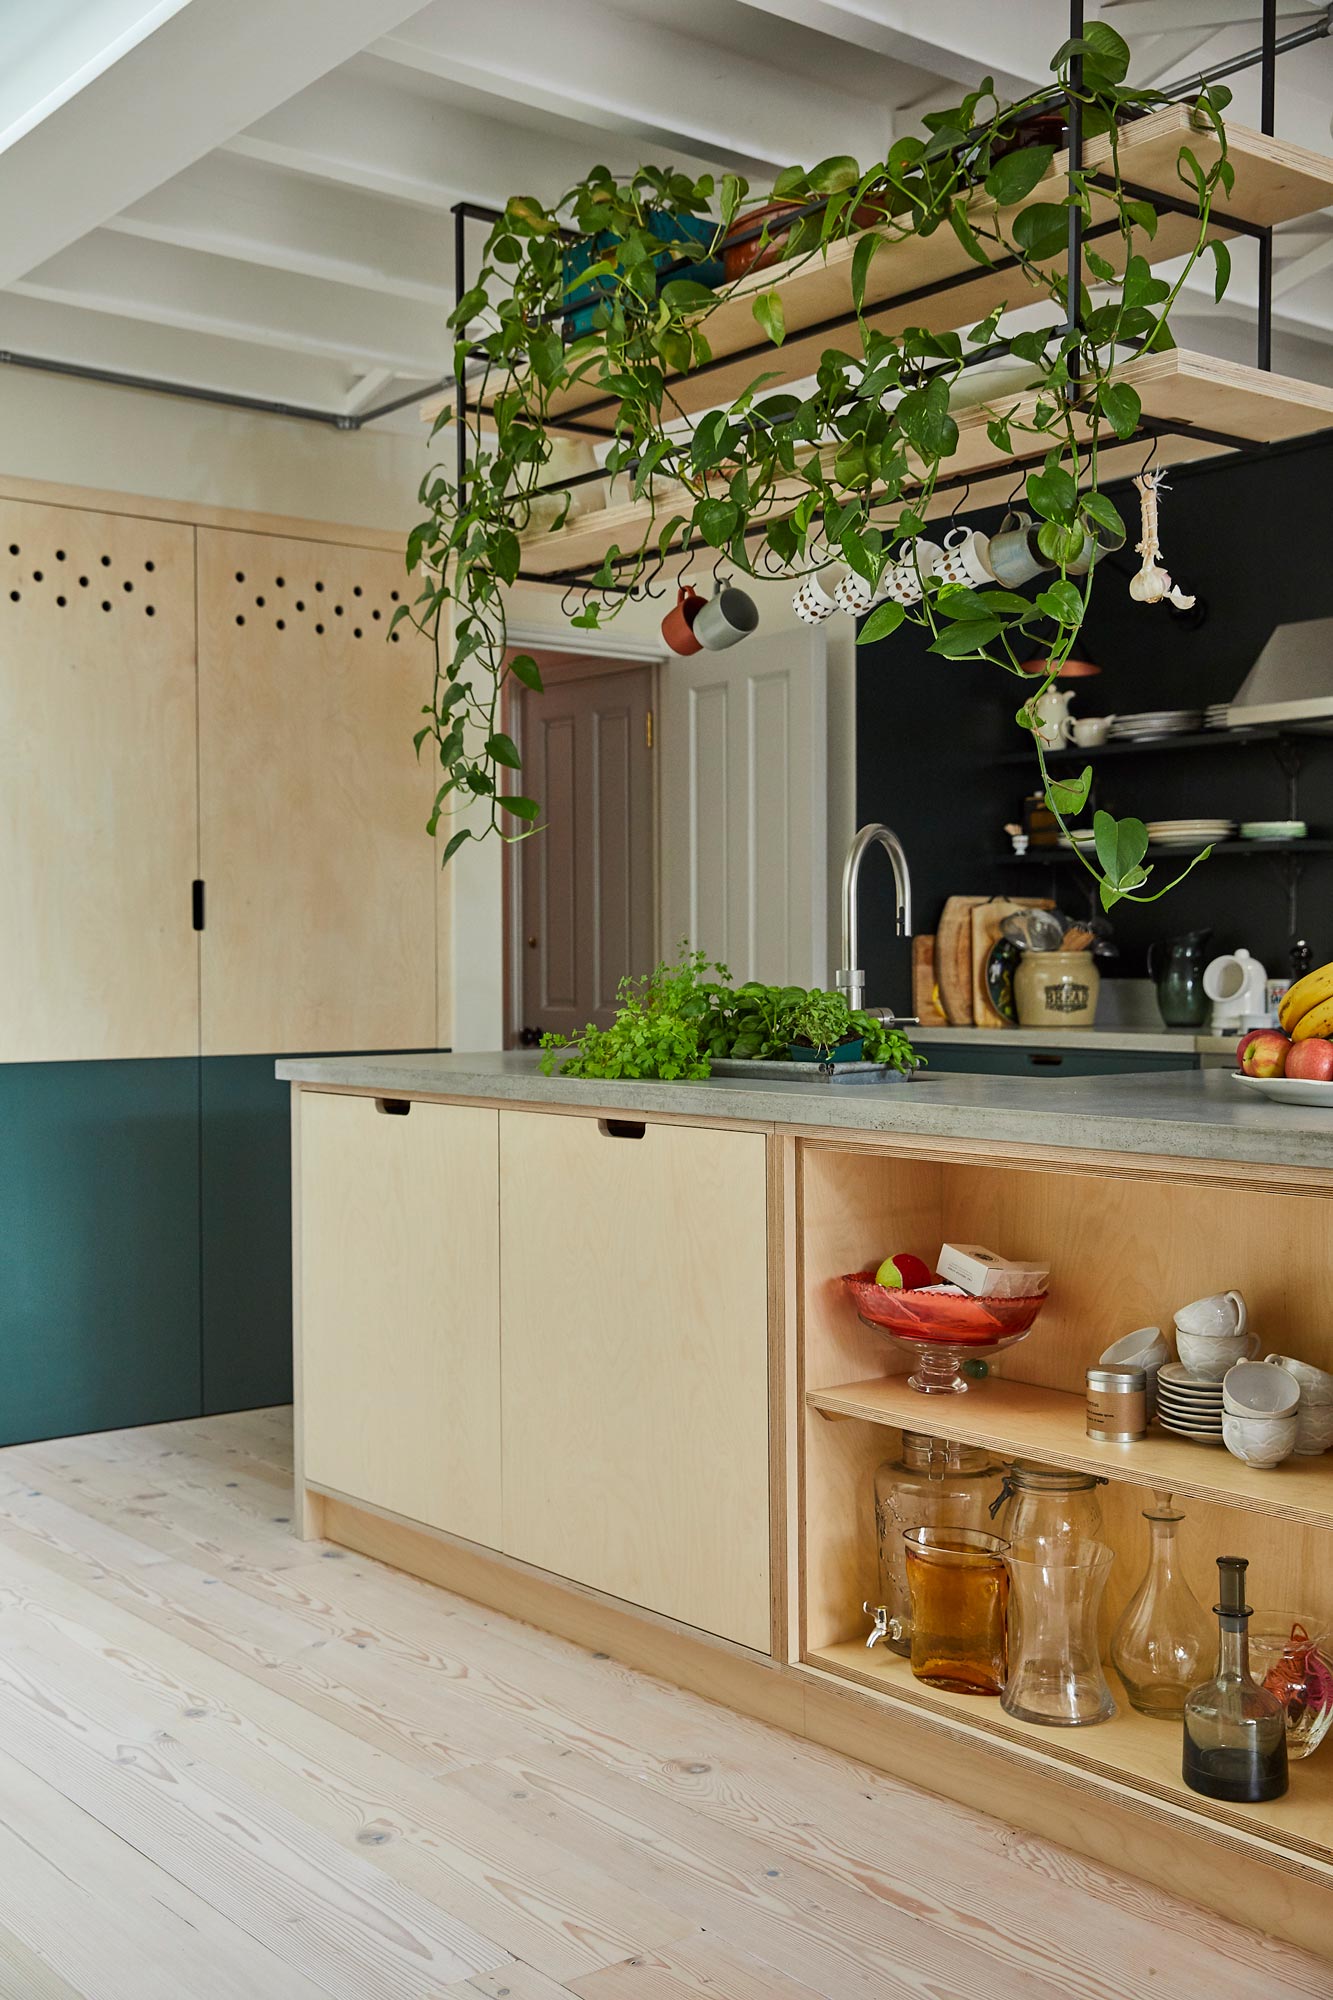 Bespoke plywood kitchen island with hanging open shelves above with plants hanging down